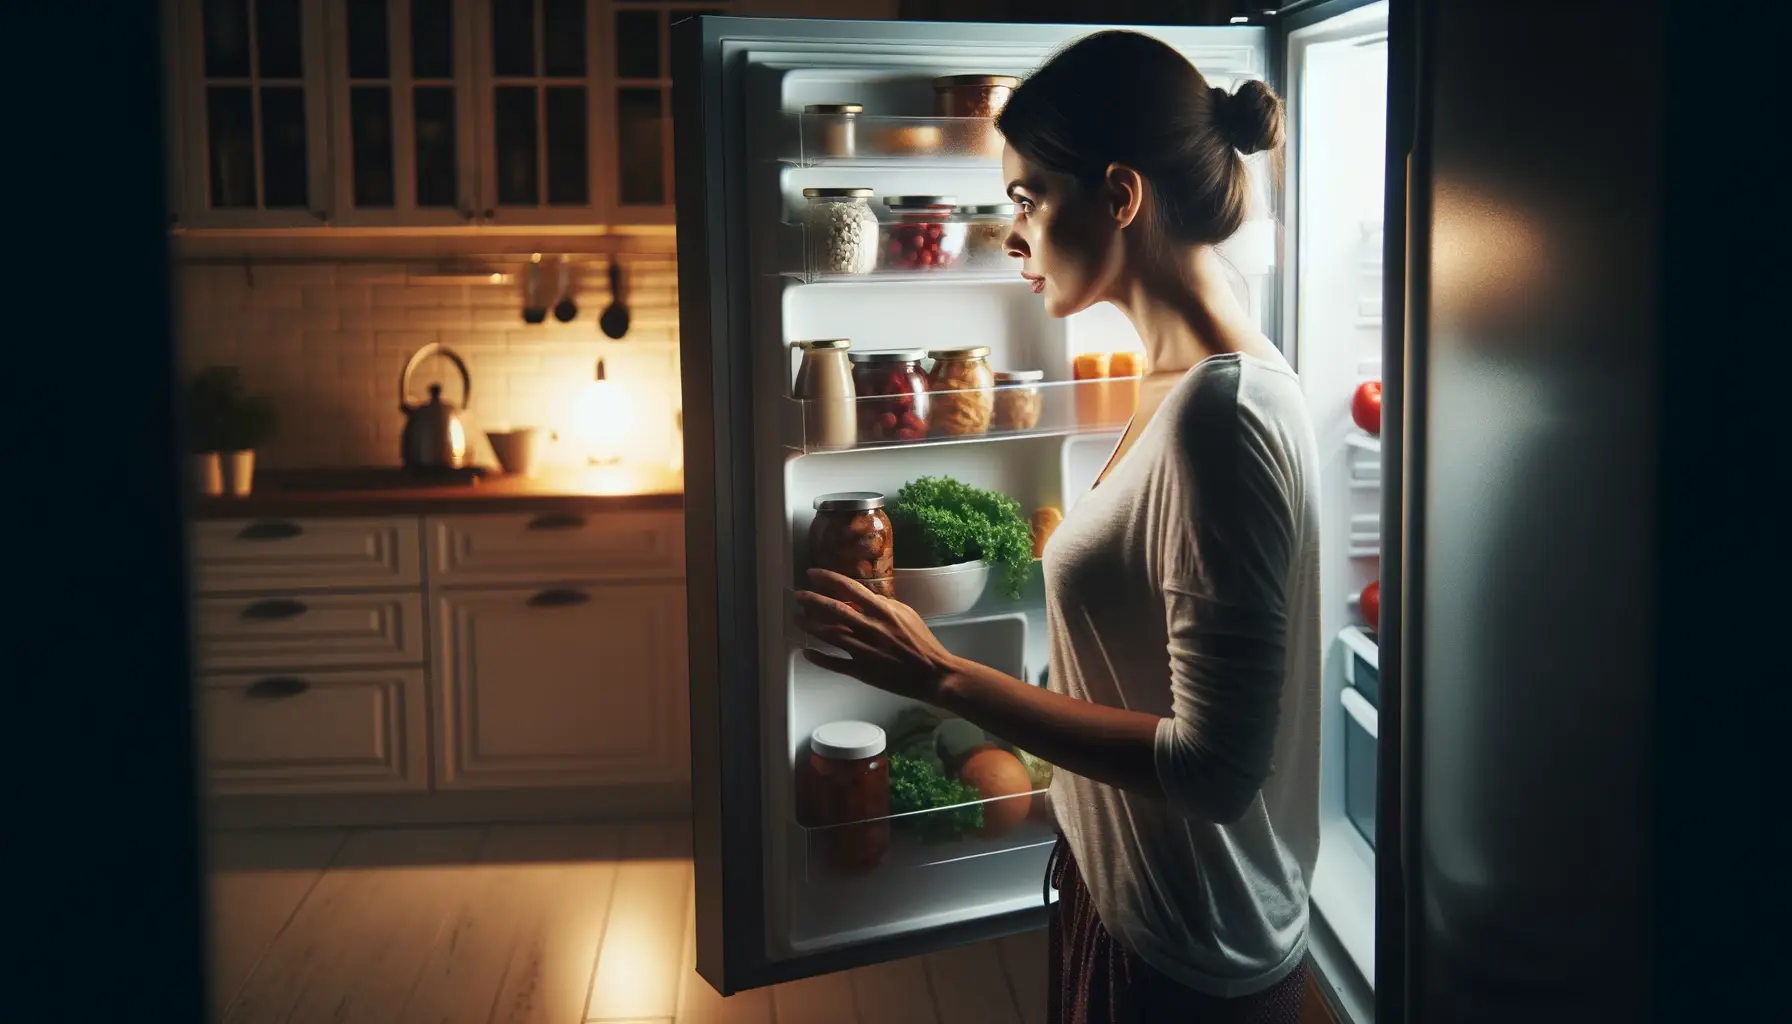 Image of homeowner discovering that her fridge won't cool.